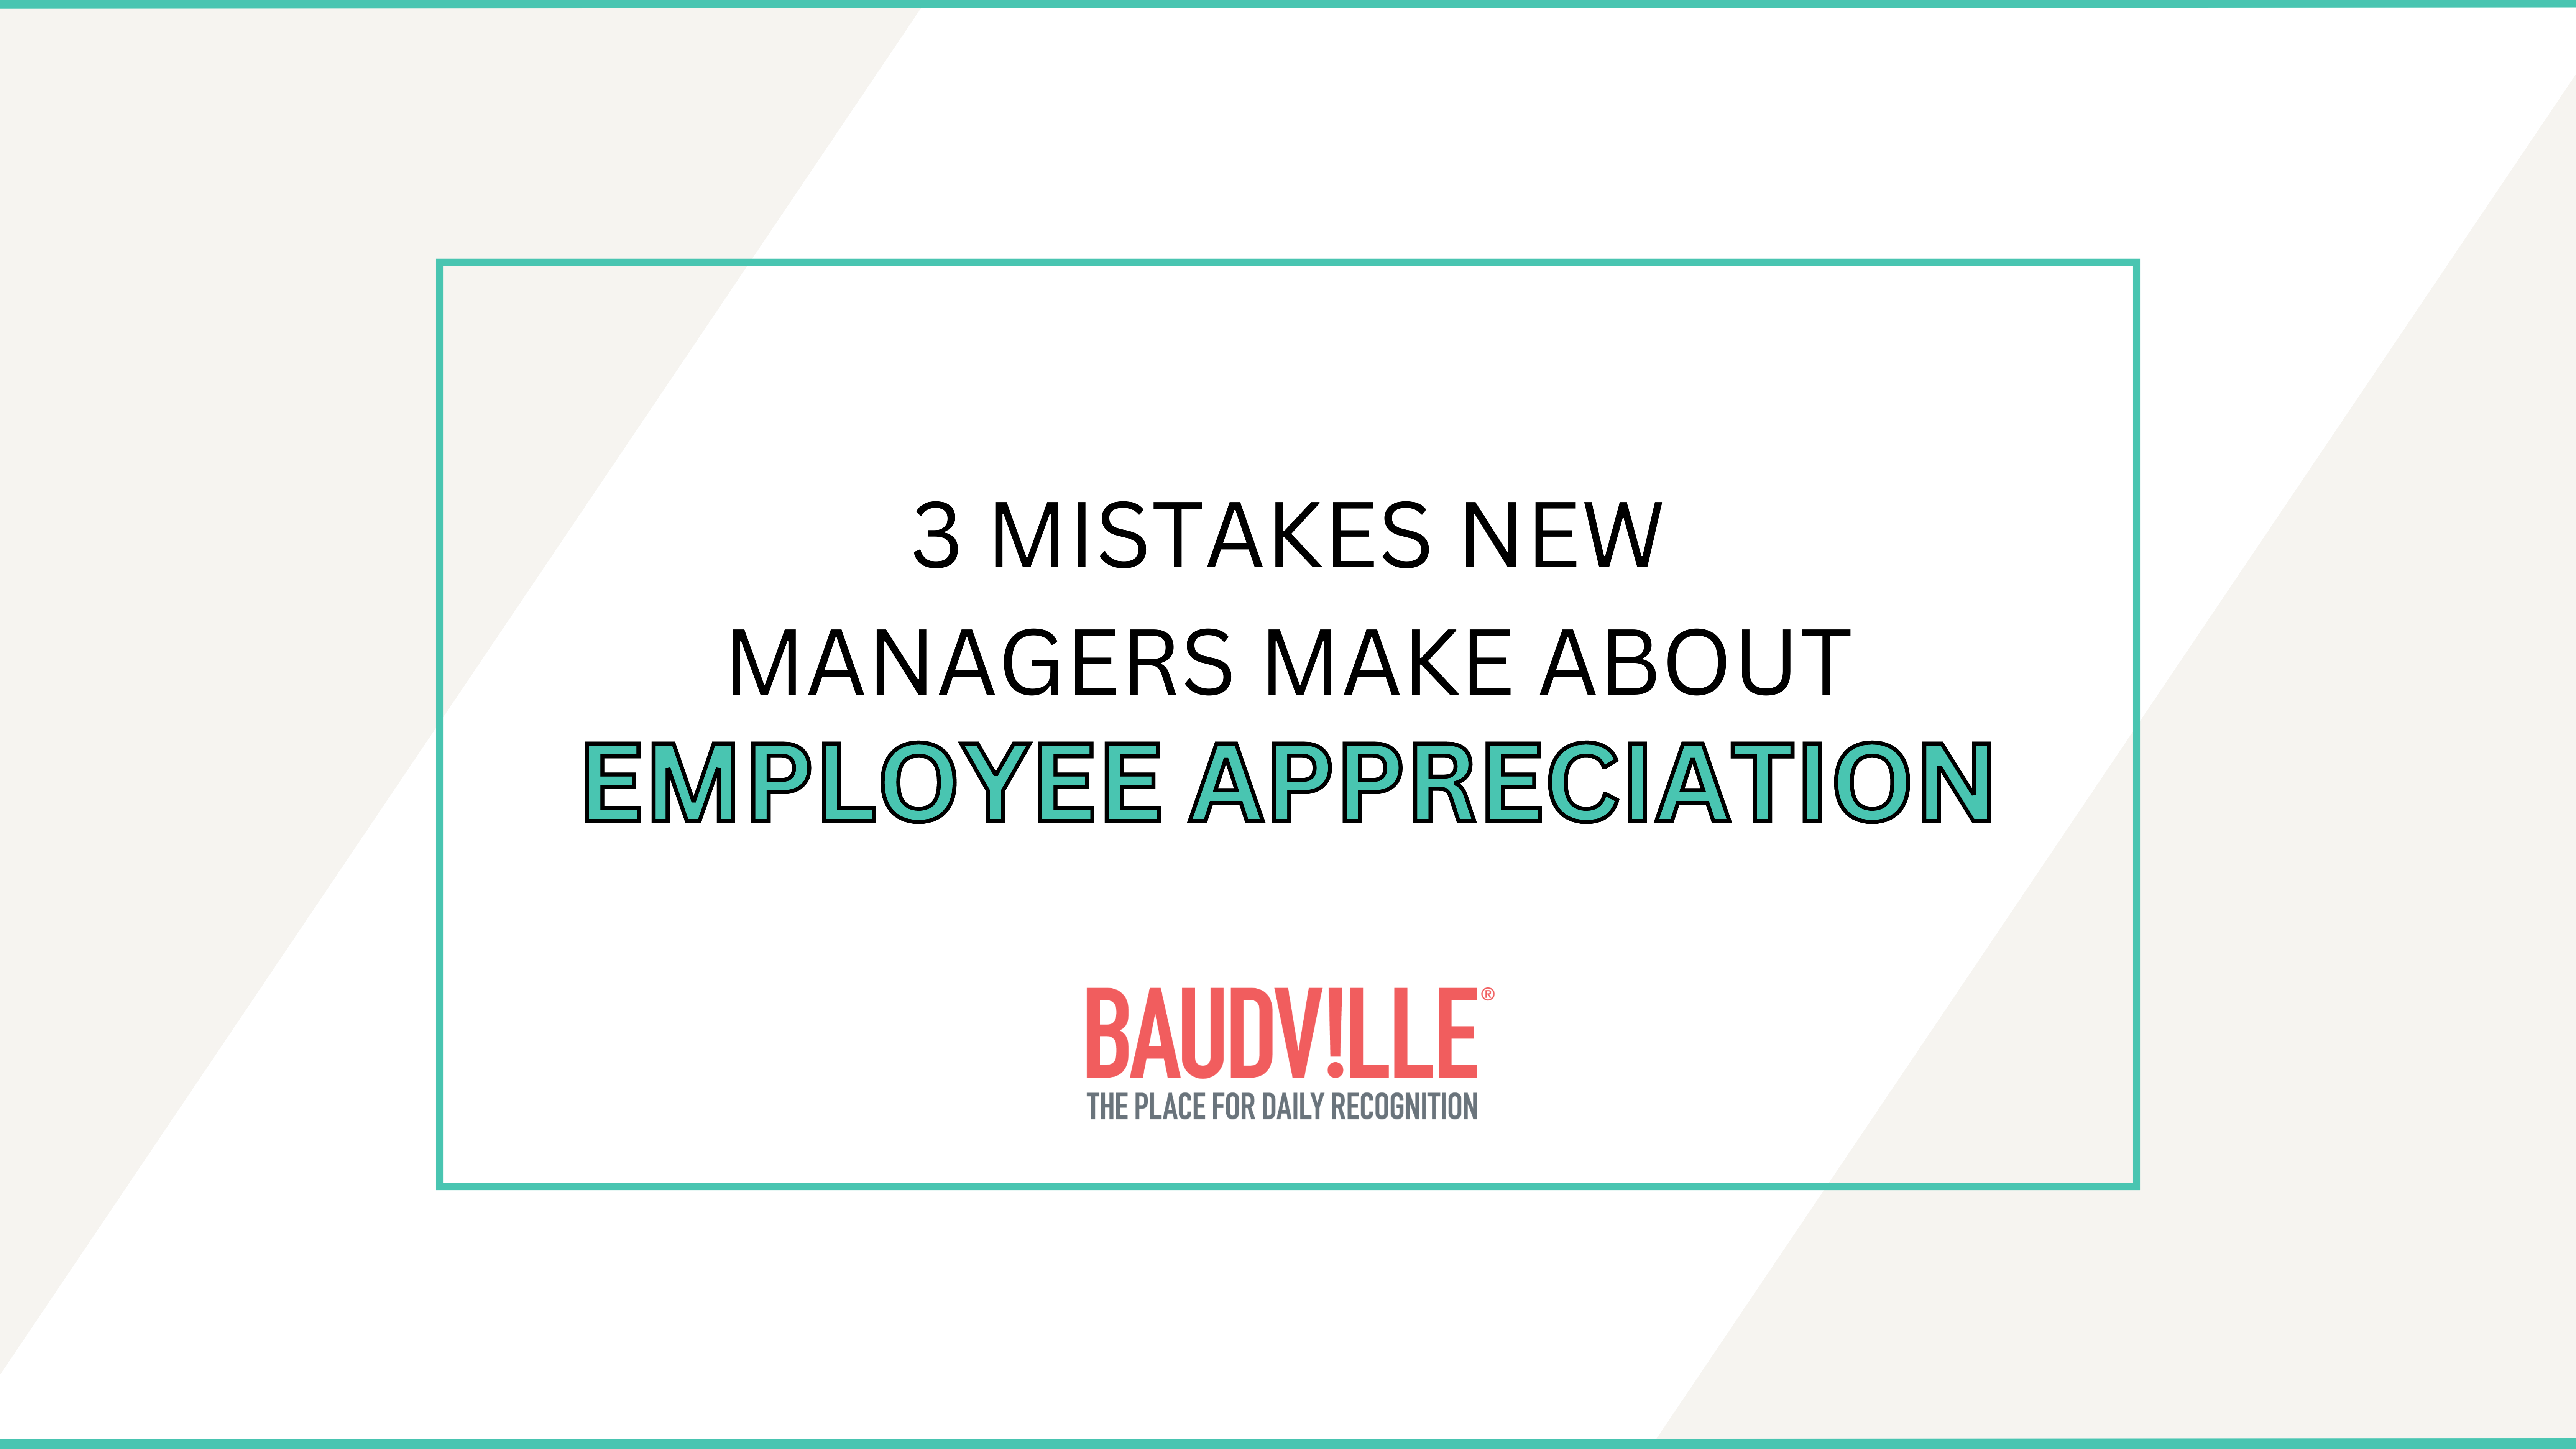 3 Mistakes New Managers Make About Employee Appreciation